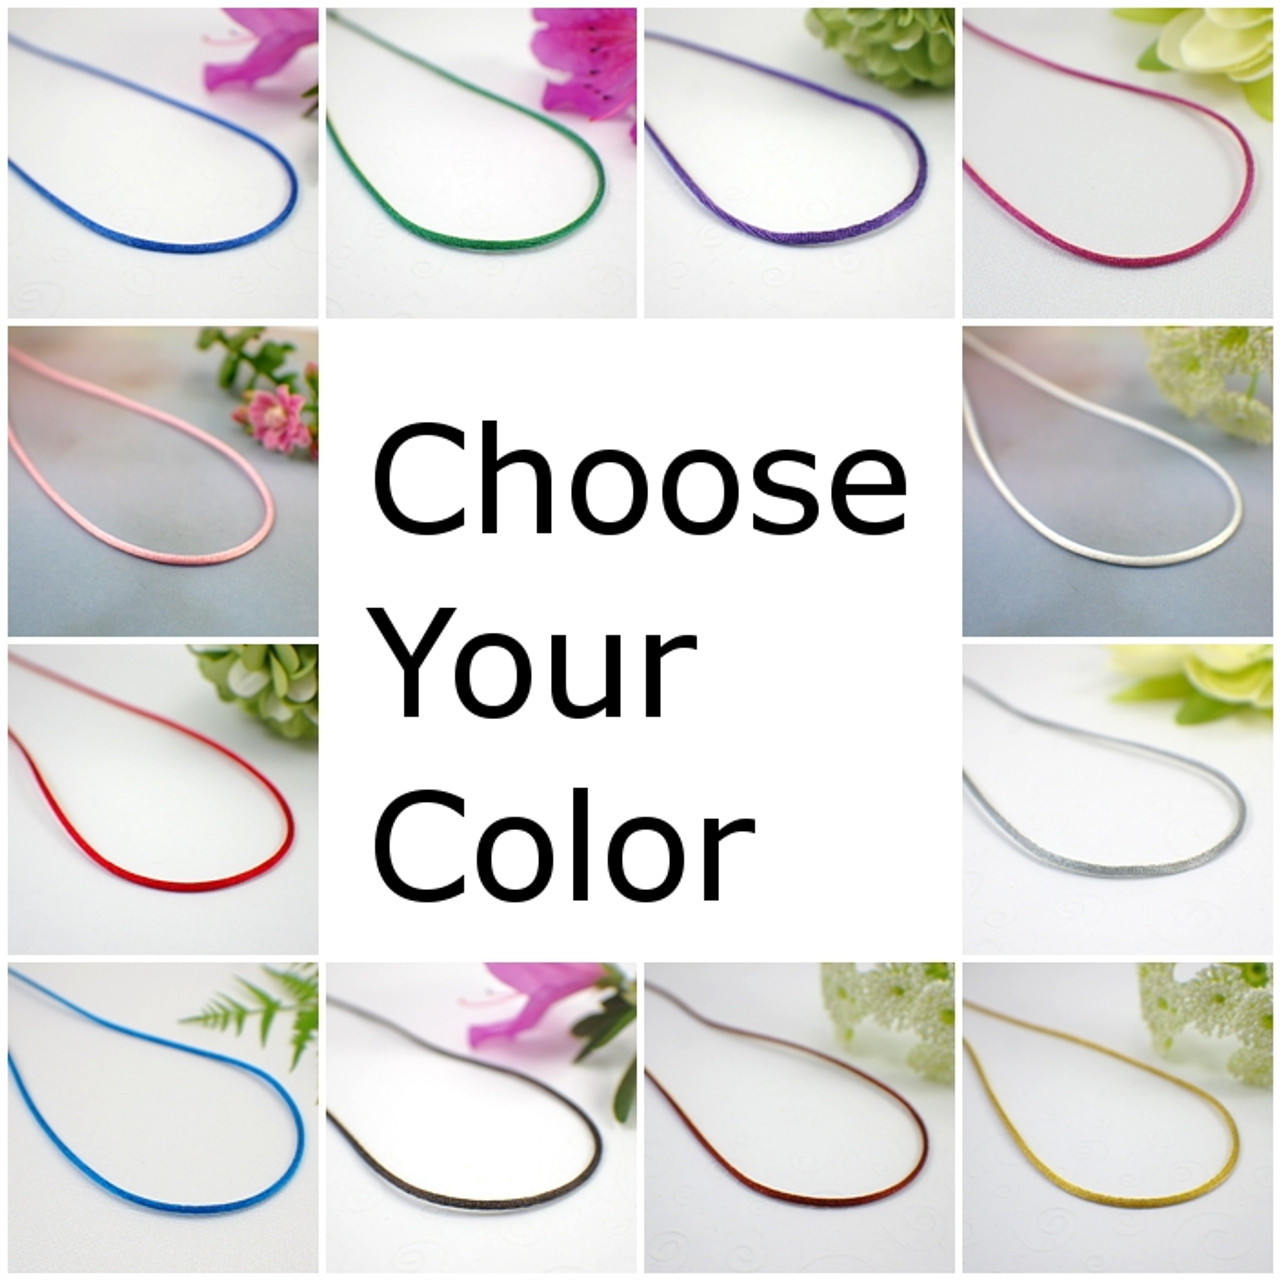 Embolden Jewelry Silk Satin Cord Rope Necklace Chain with Hypoallergenic Clasp - 14 16 18 20 22 24 26 28